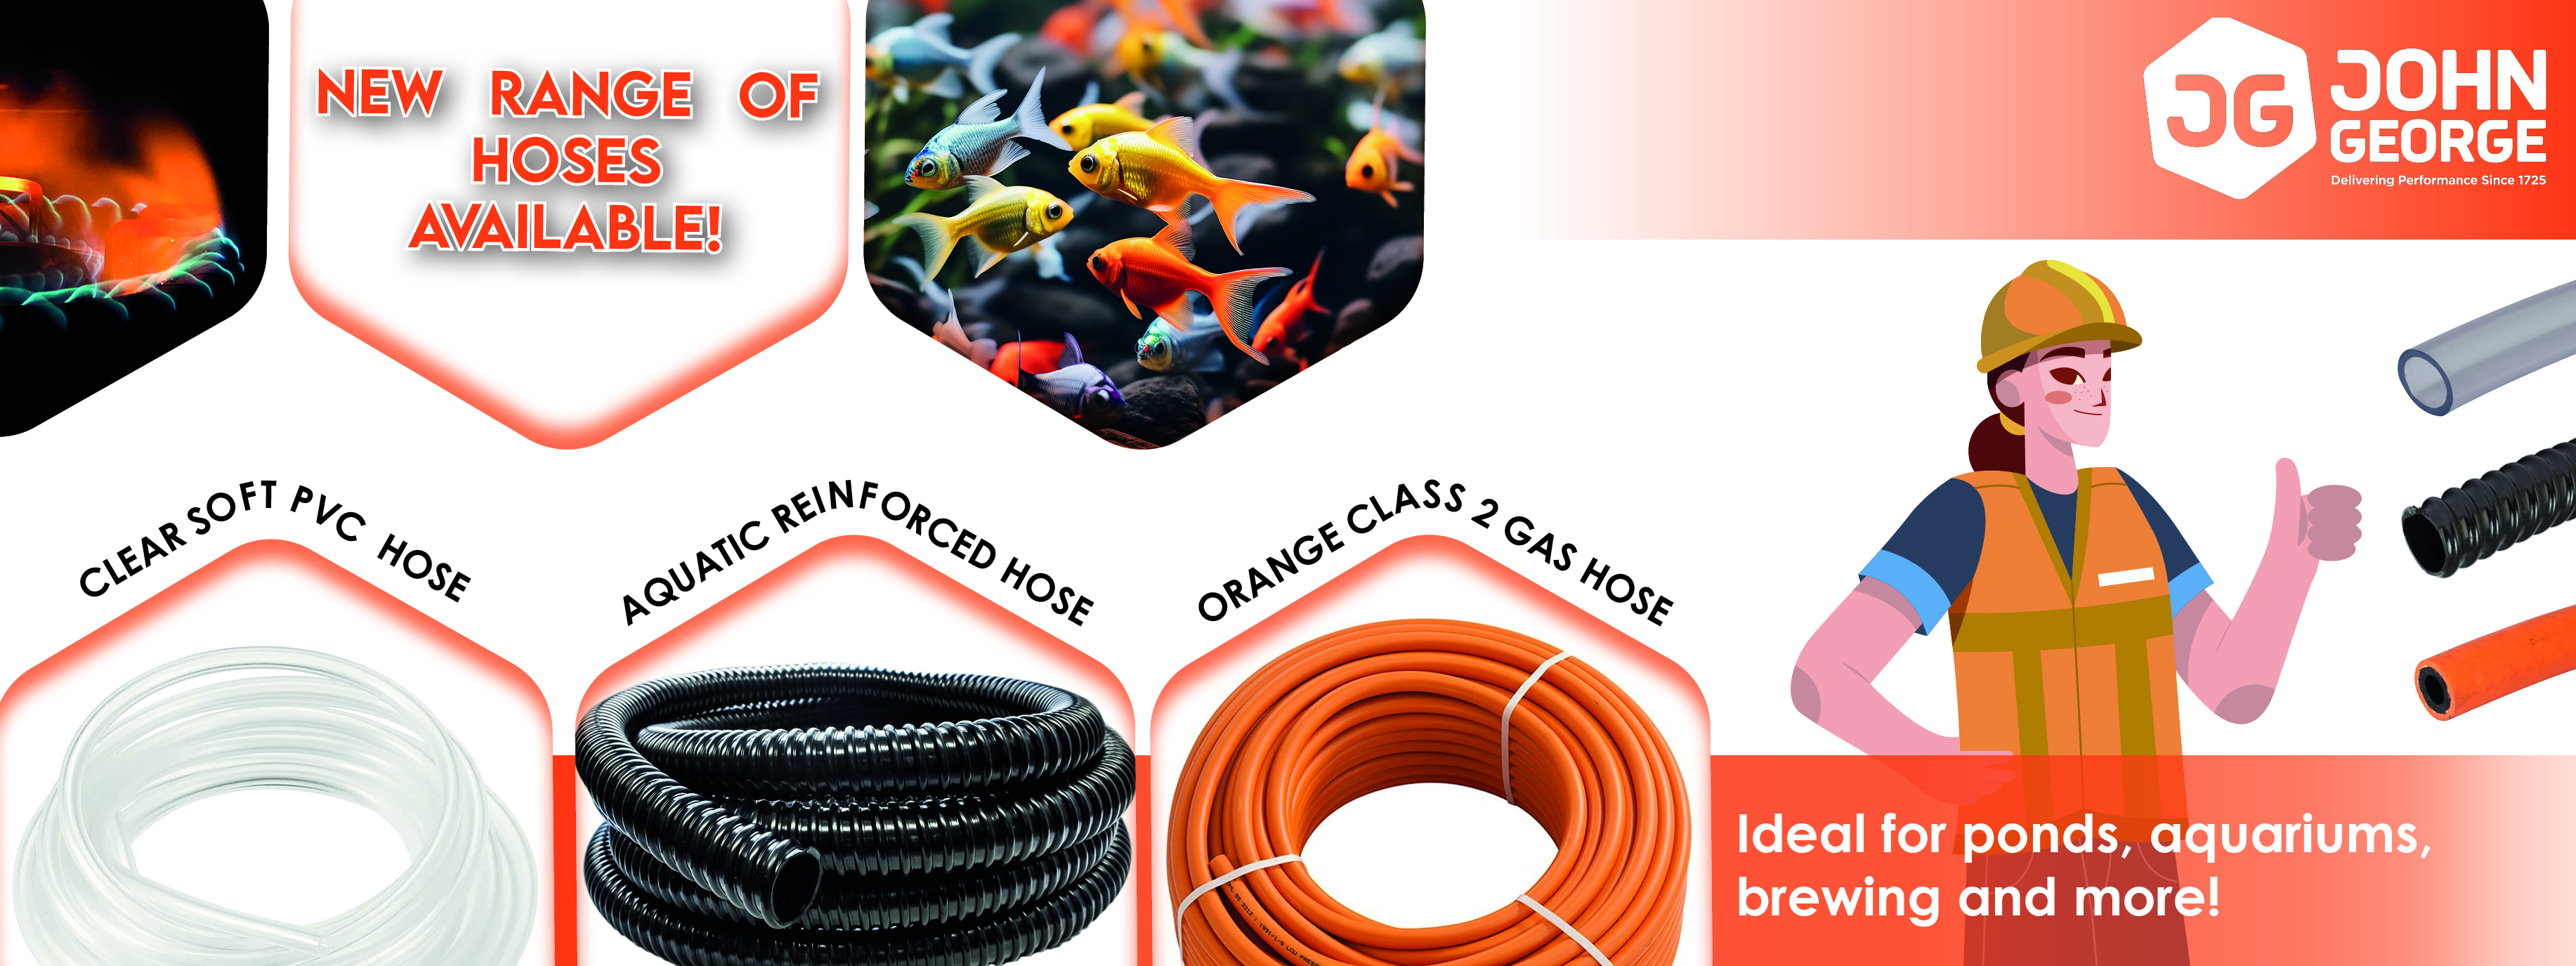 See our range of hoses!